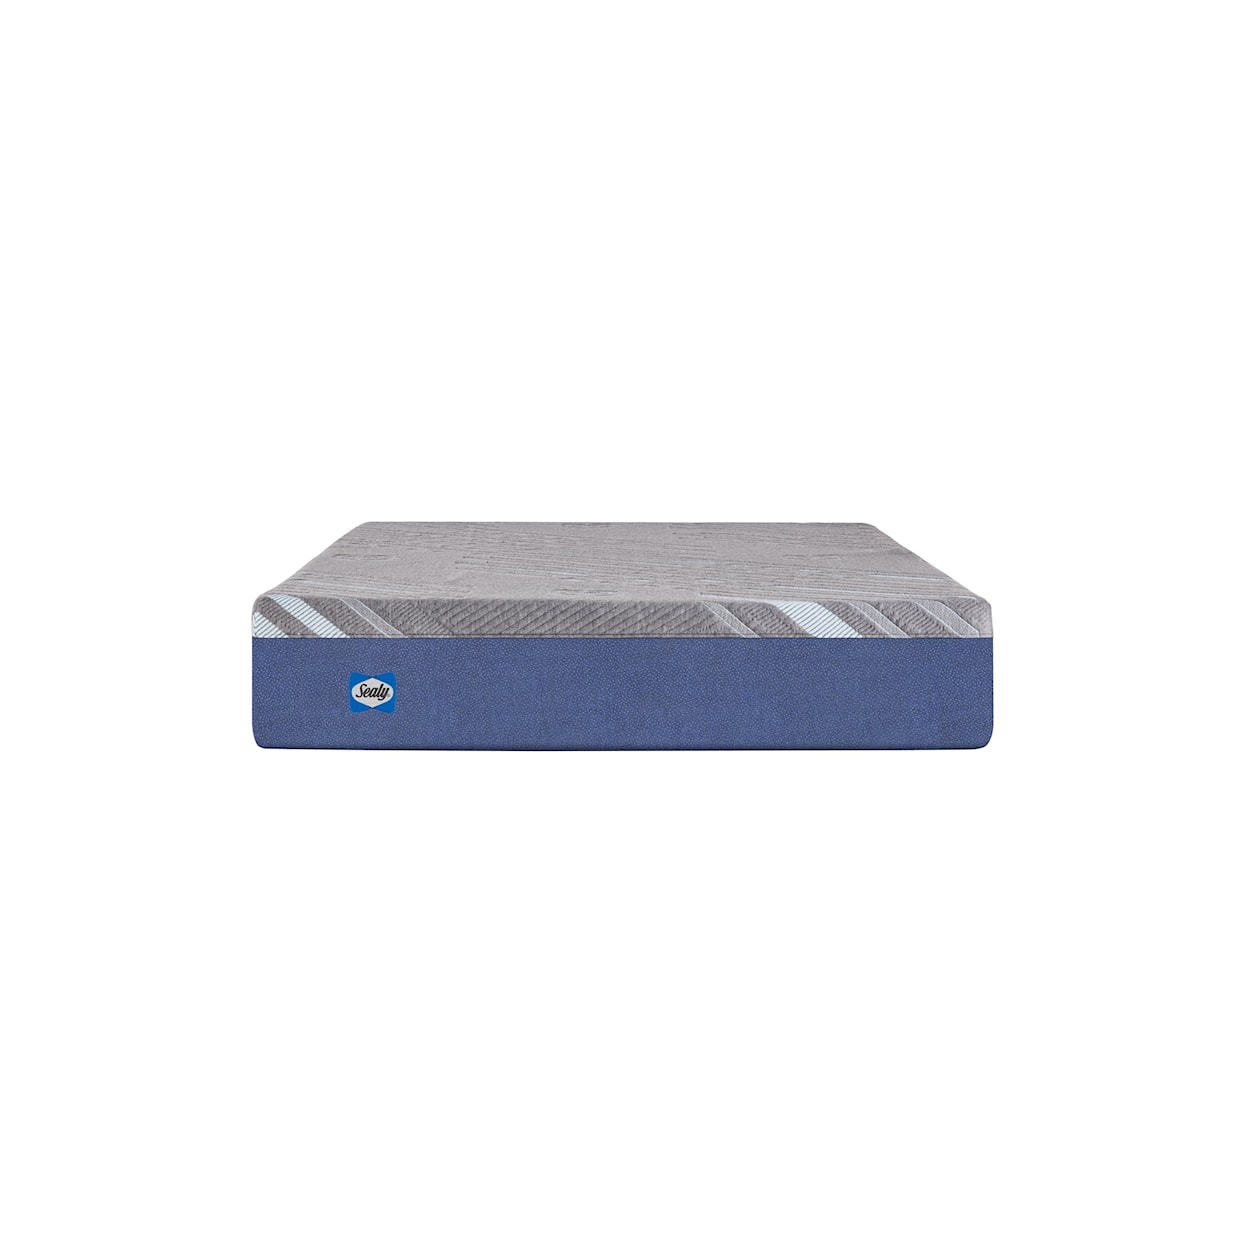 Sealy Palatial Crest F6 Cathedral Cove Medium Queen Mattress